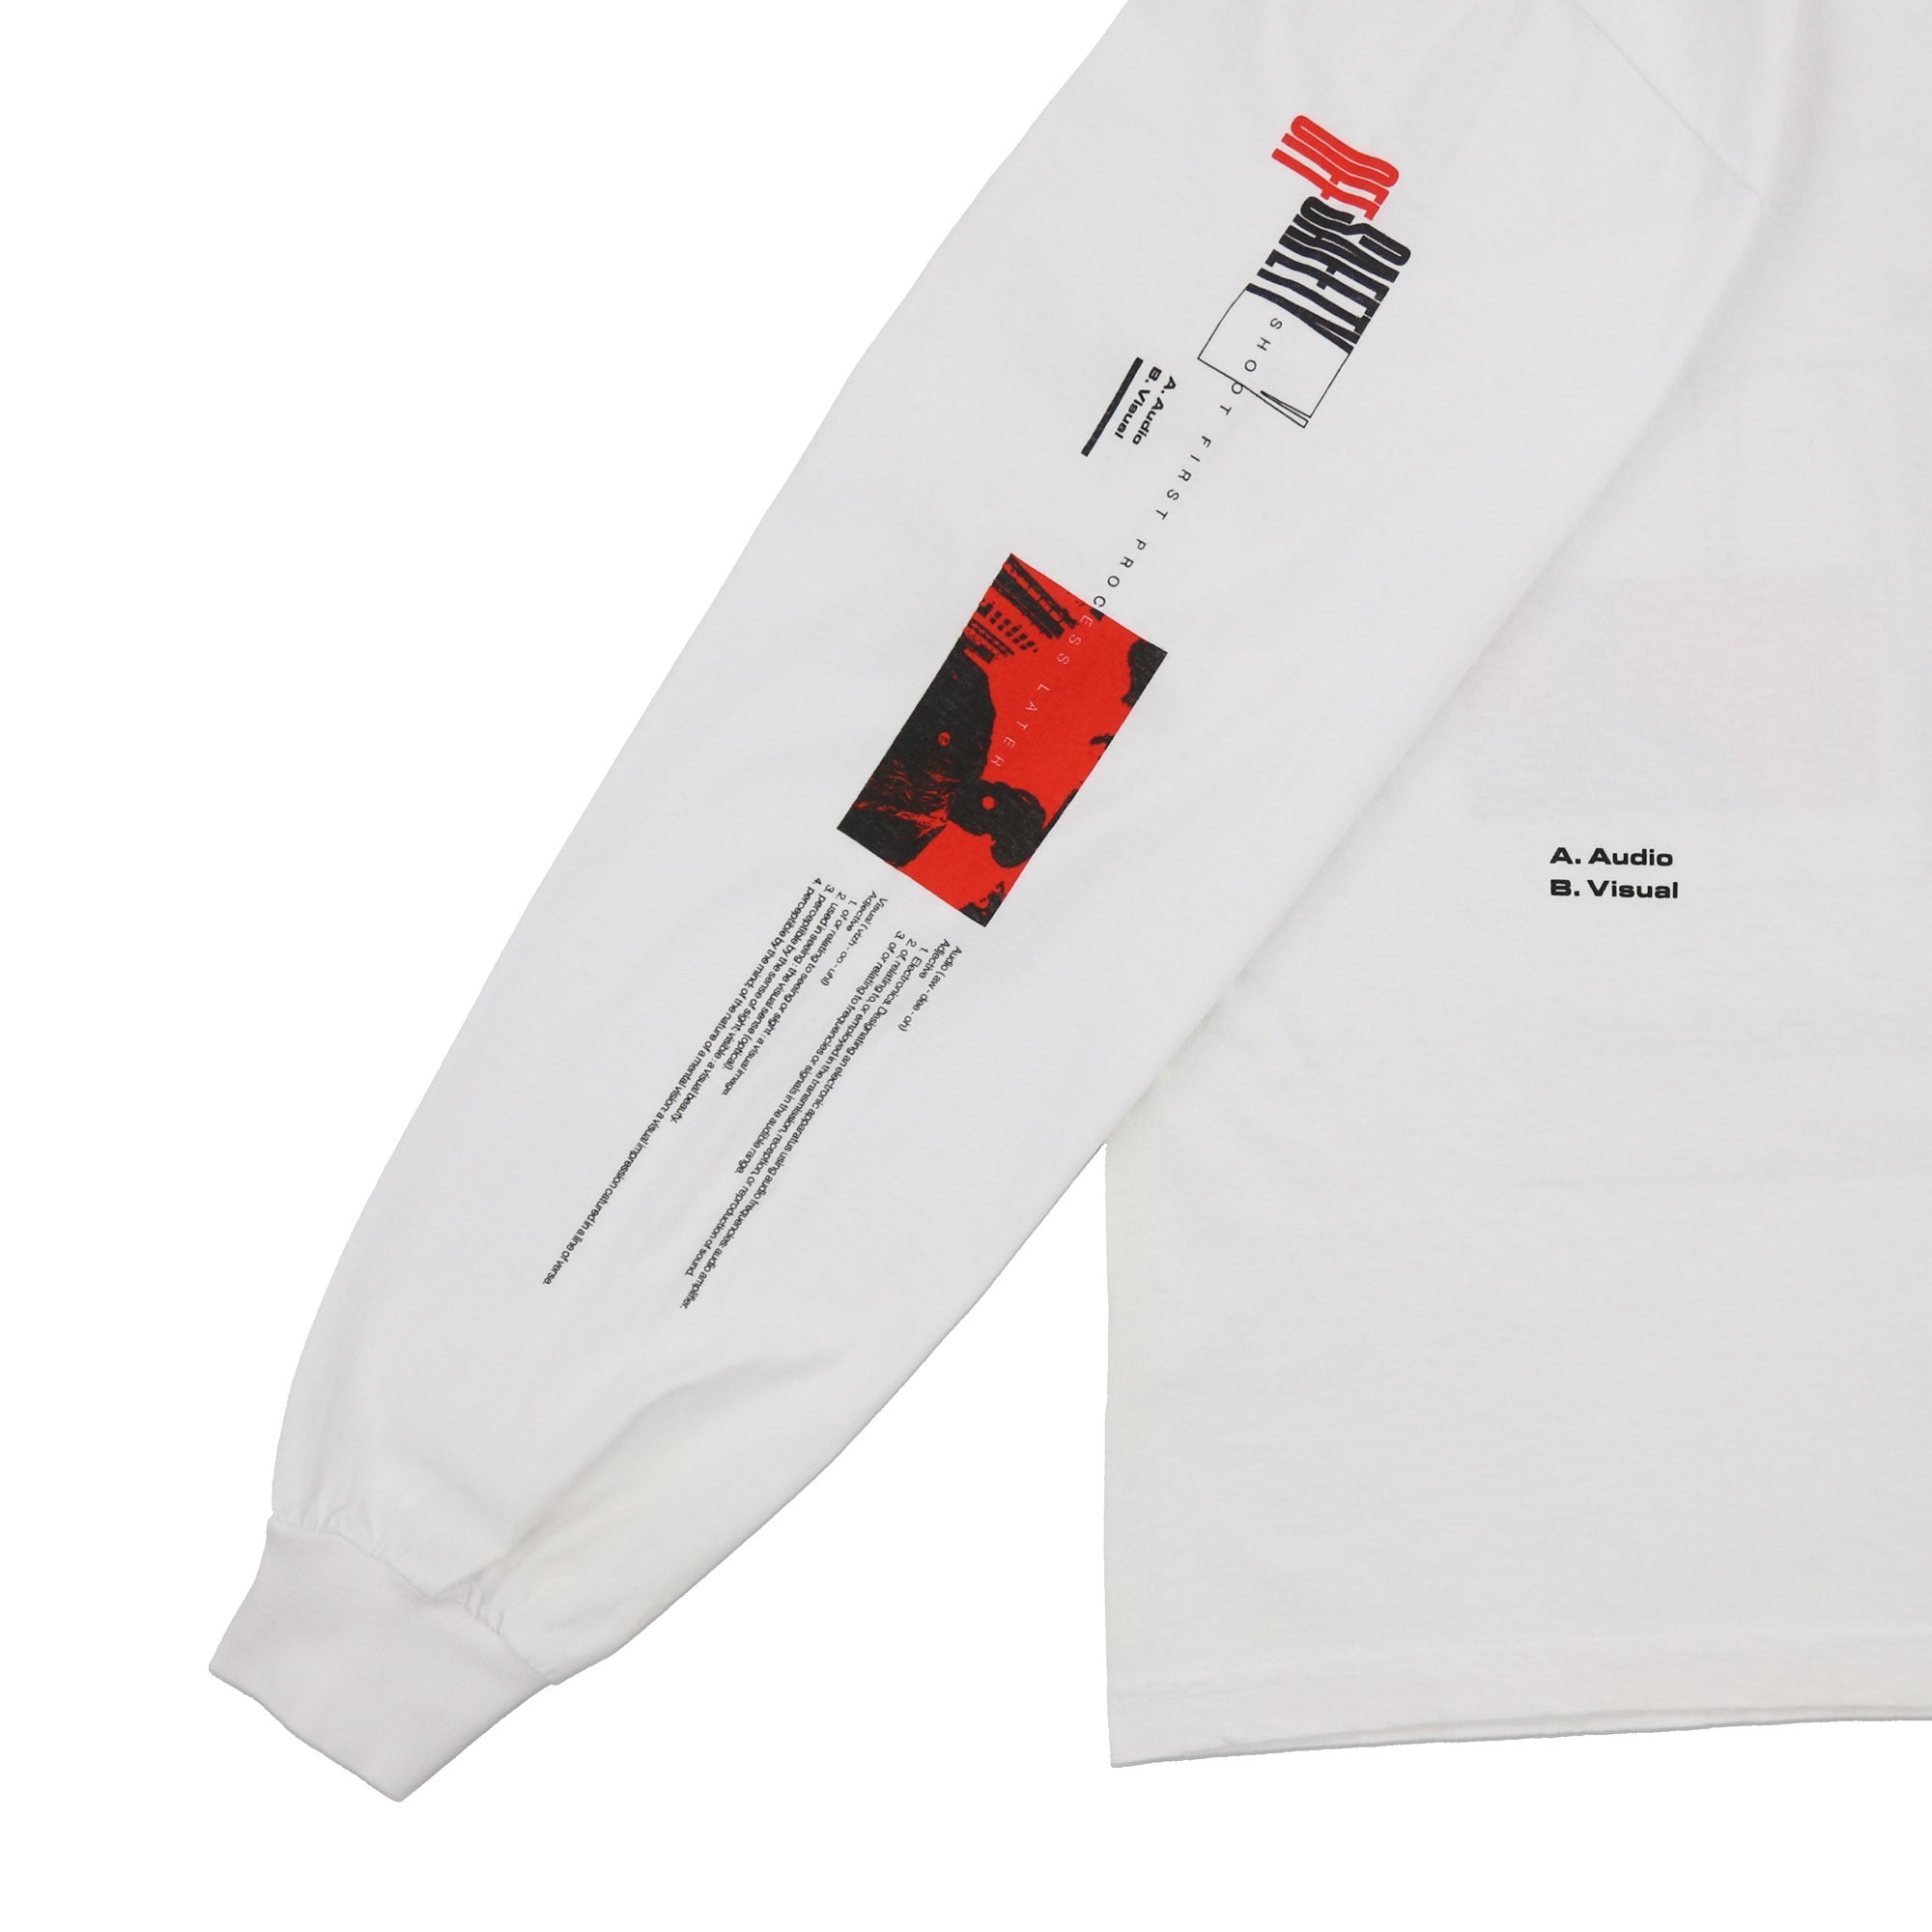 Sky's The Limit LS Tee (White)